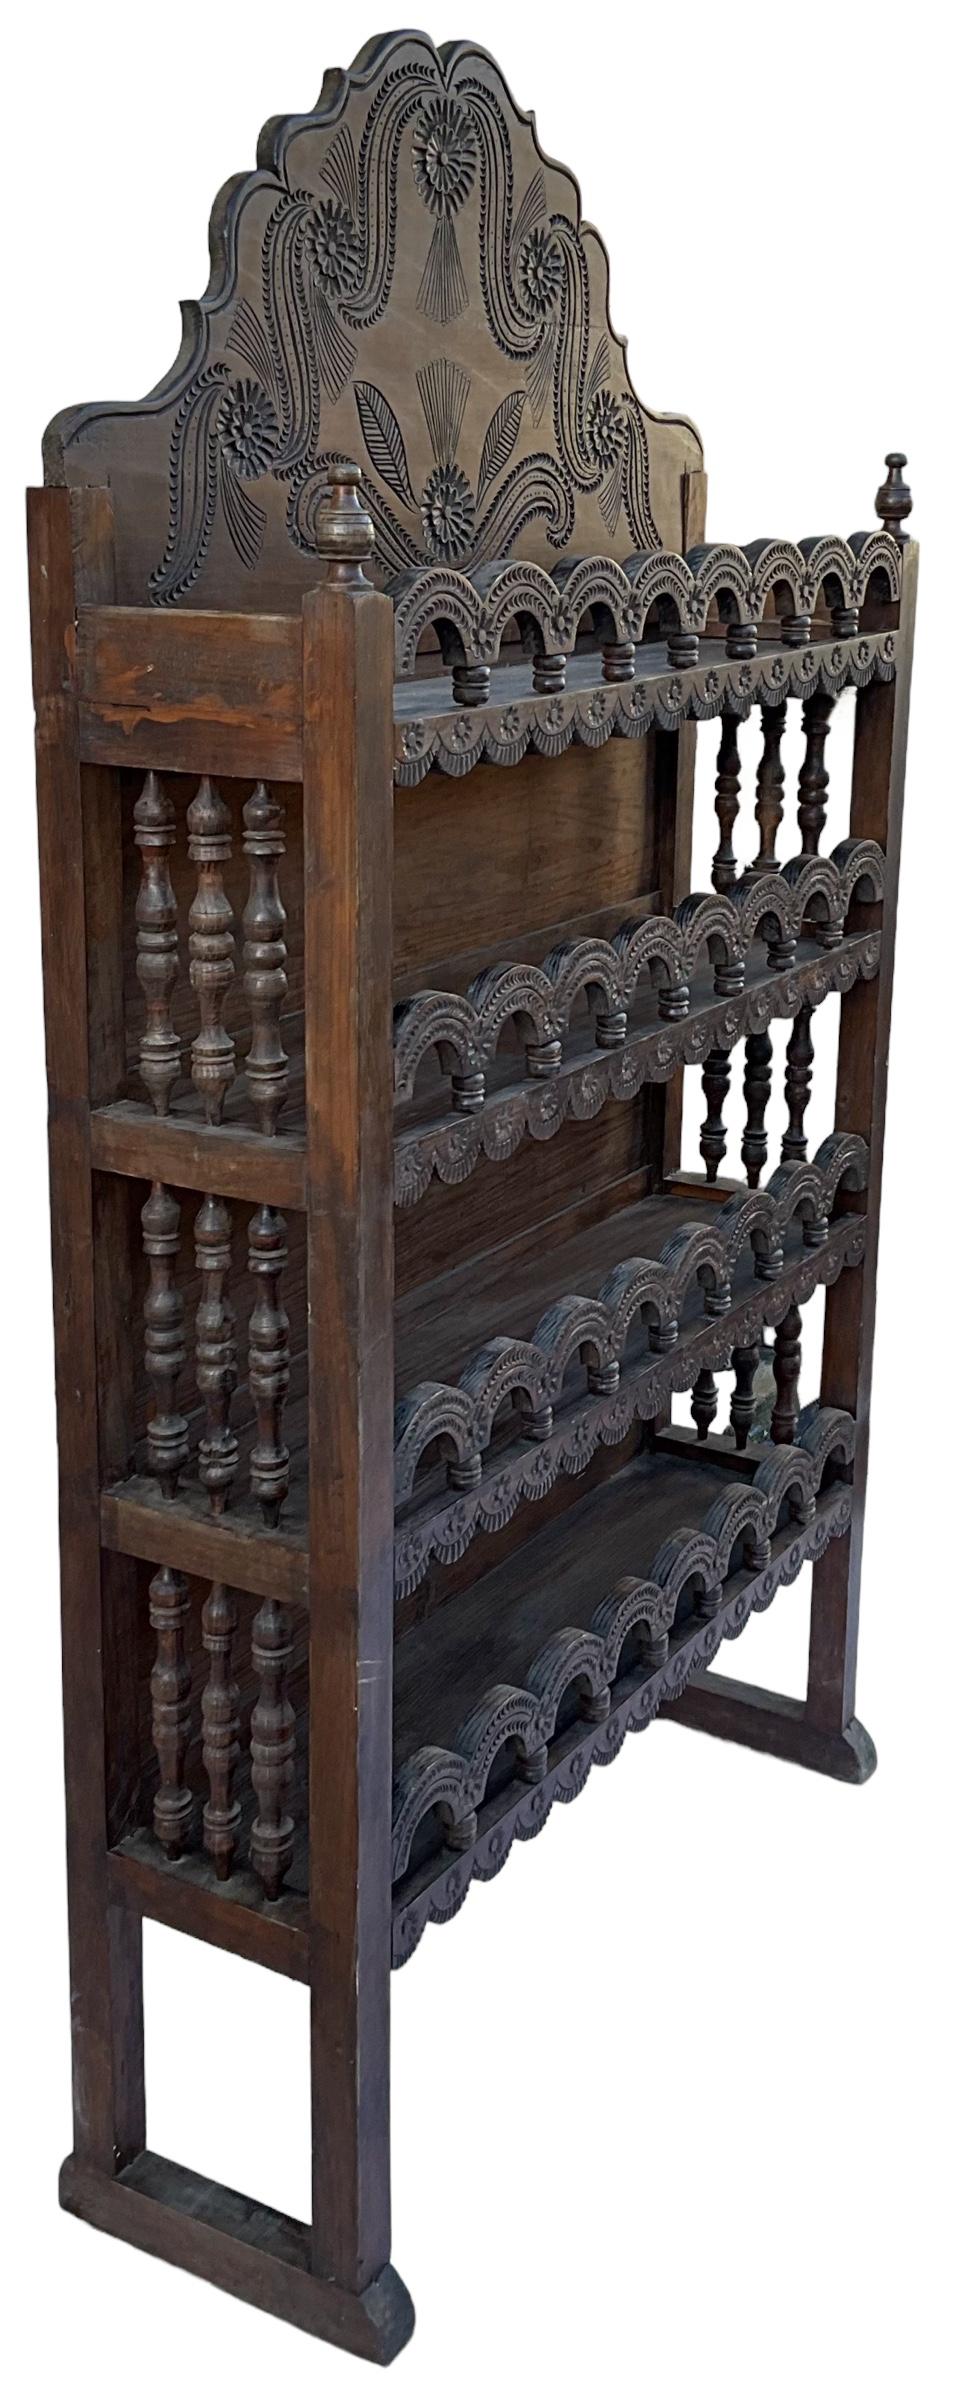 This is an early heavily carved Moroccan etagere / shelving unit. The pierced swags and turned supports adorning each shelf really elevate the look. There is roughly 12 inches between each shelf. This could work in a variety of spaces from kitchen